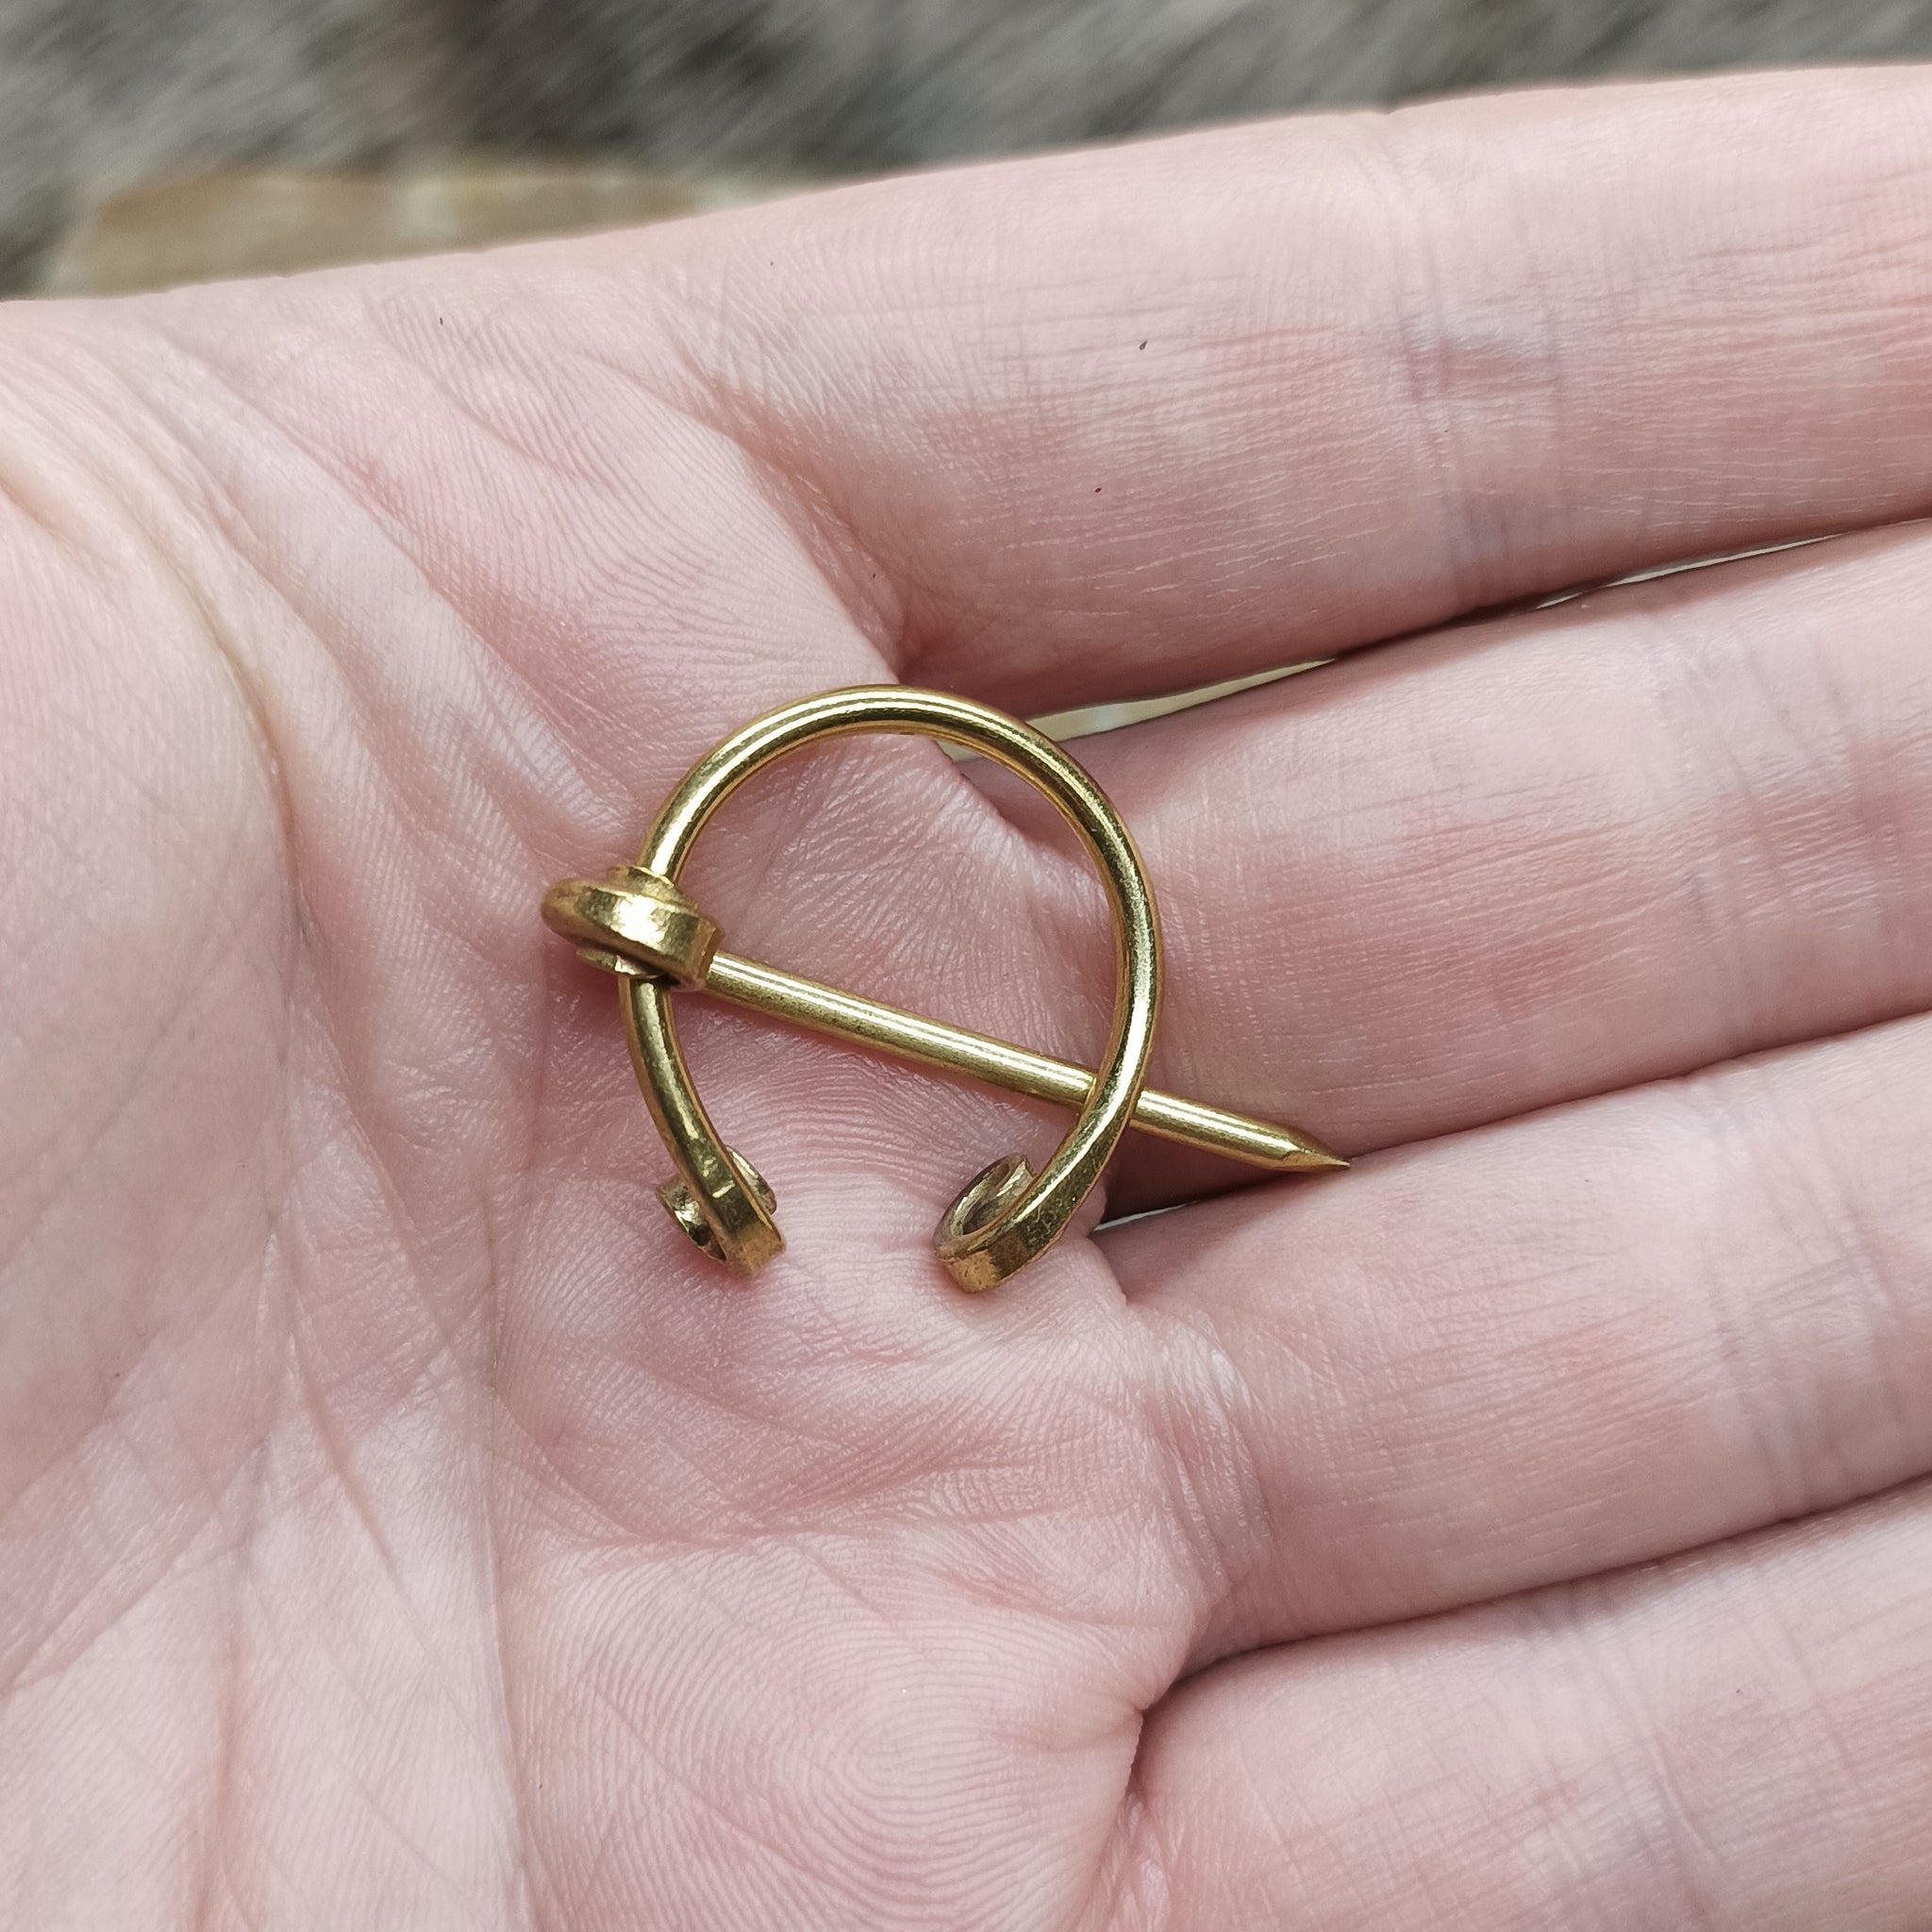 20mm Brass Cloak Pin / Clothes Pin on Hand